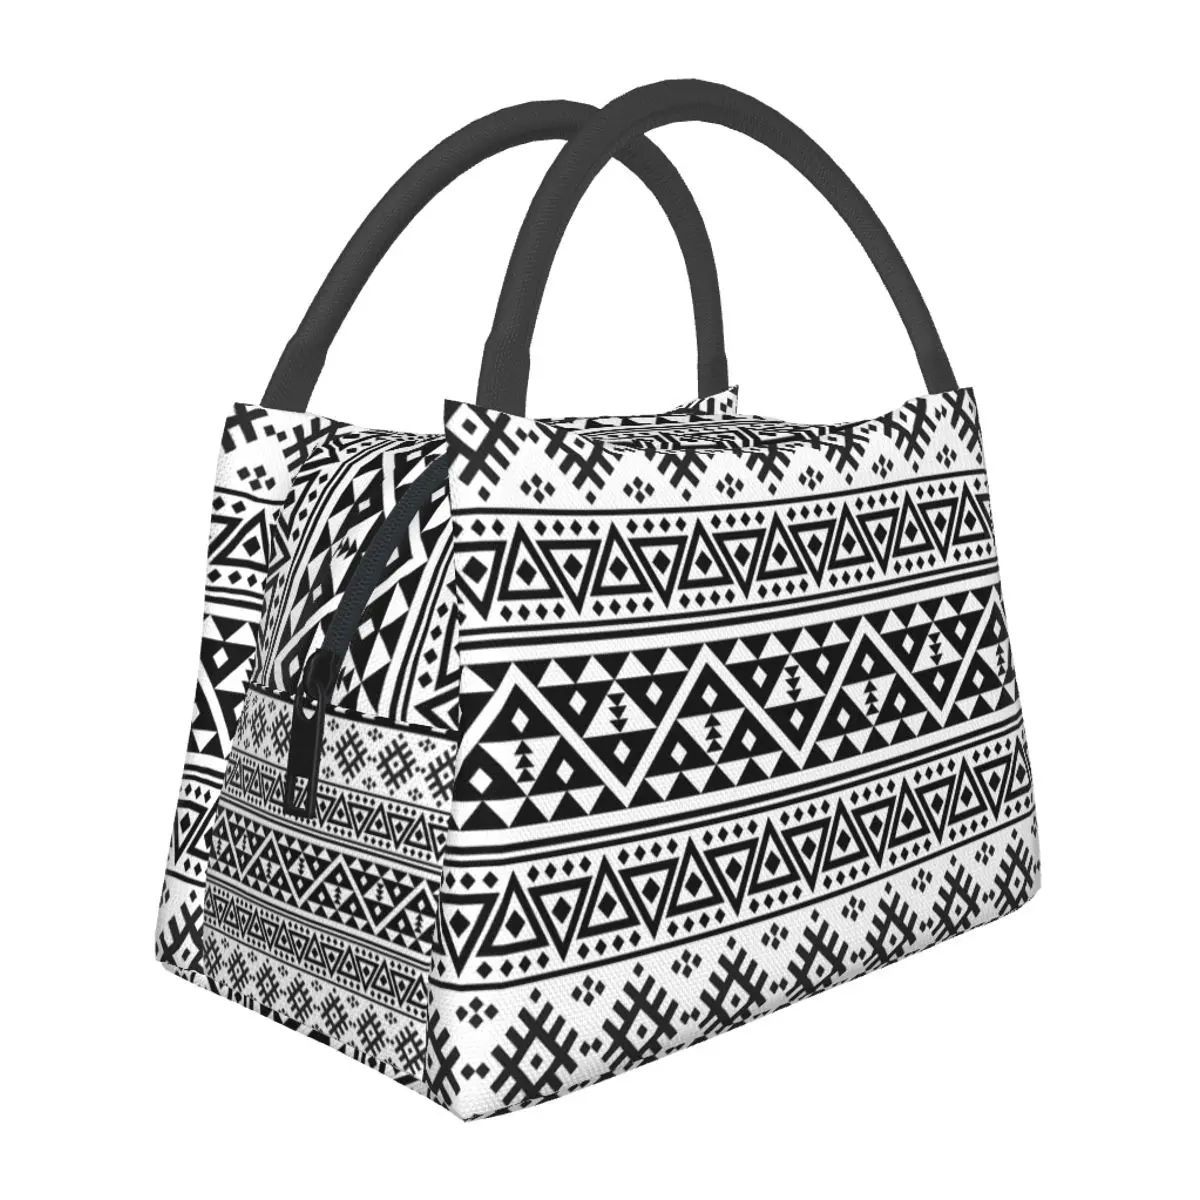 

Tribal Print Lunch Bag Black White Geometric Aesthetic Lunch Box School Convenient Tote Food Bags Print Cooler Bag